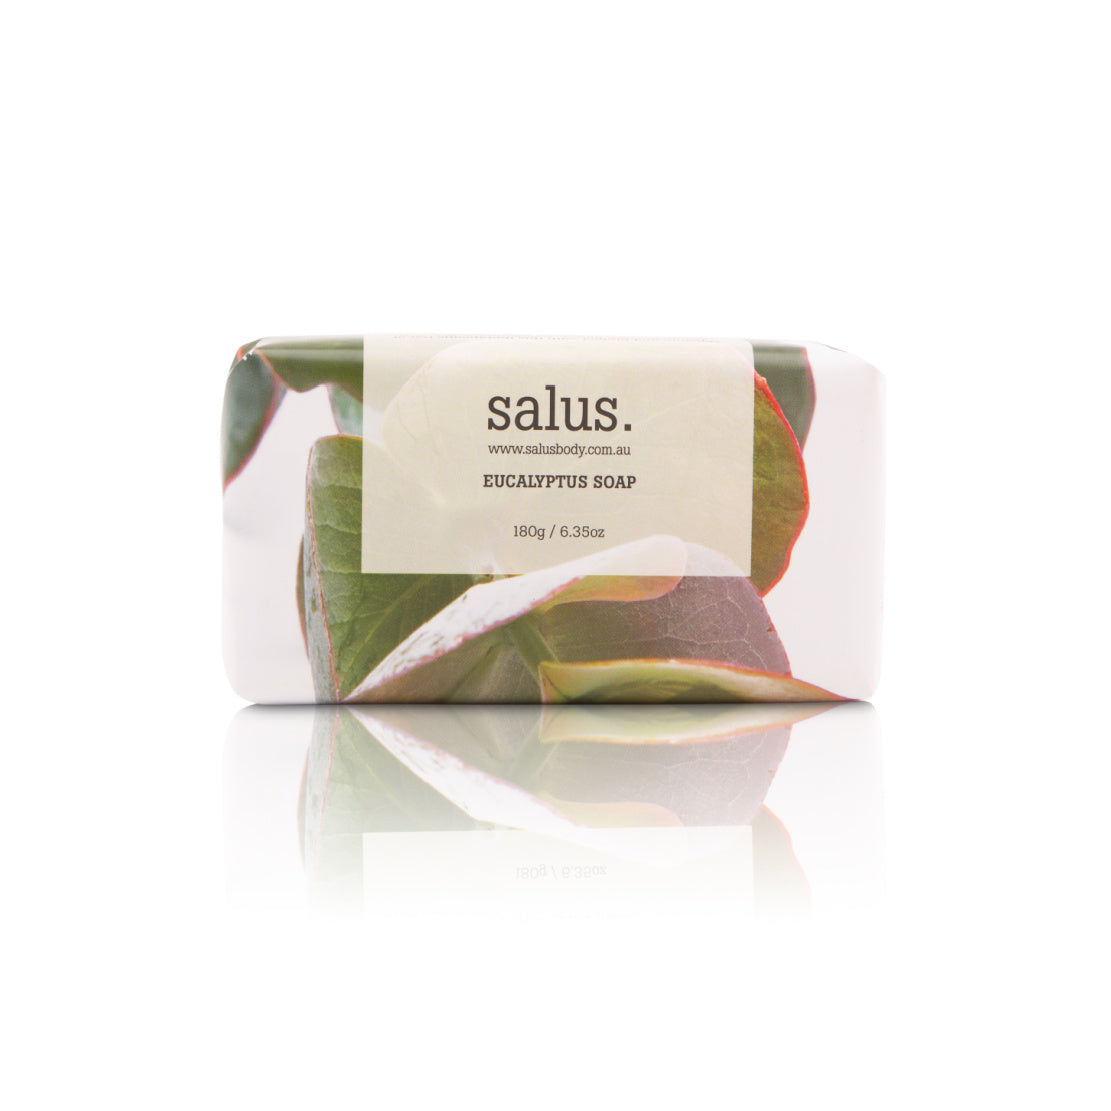 same day indoor plant and gift delivery Melbourne | Salus Bar Soaps 